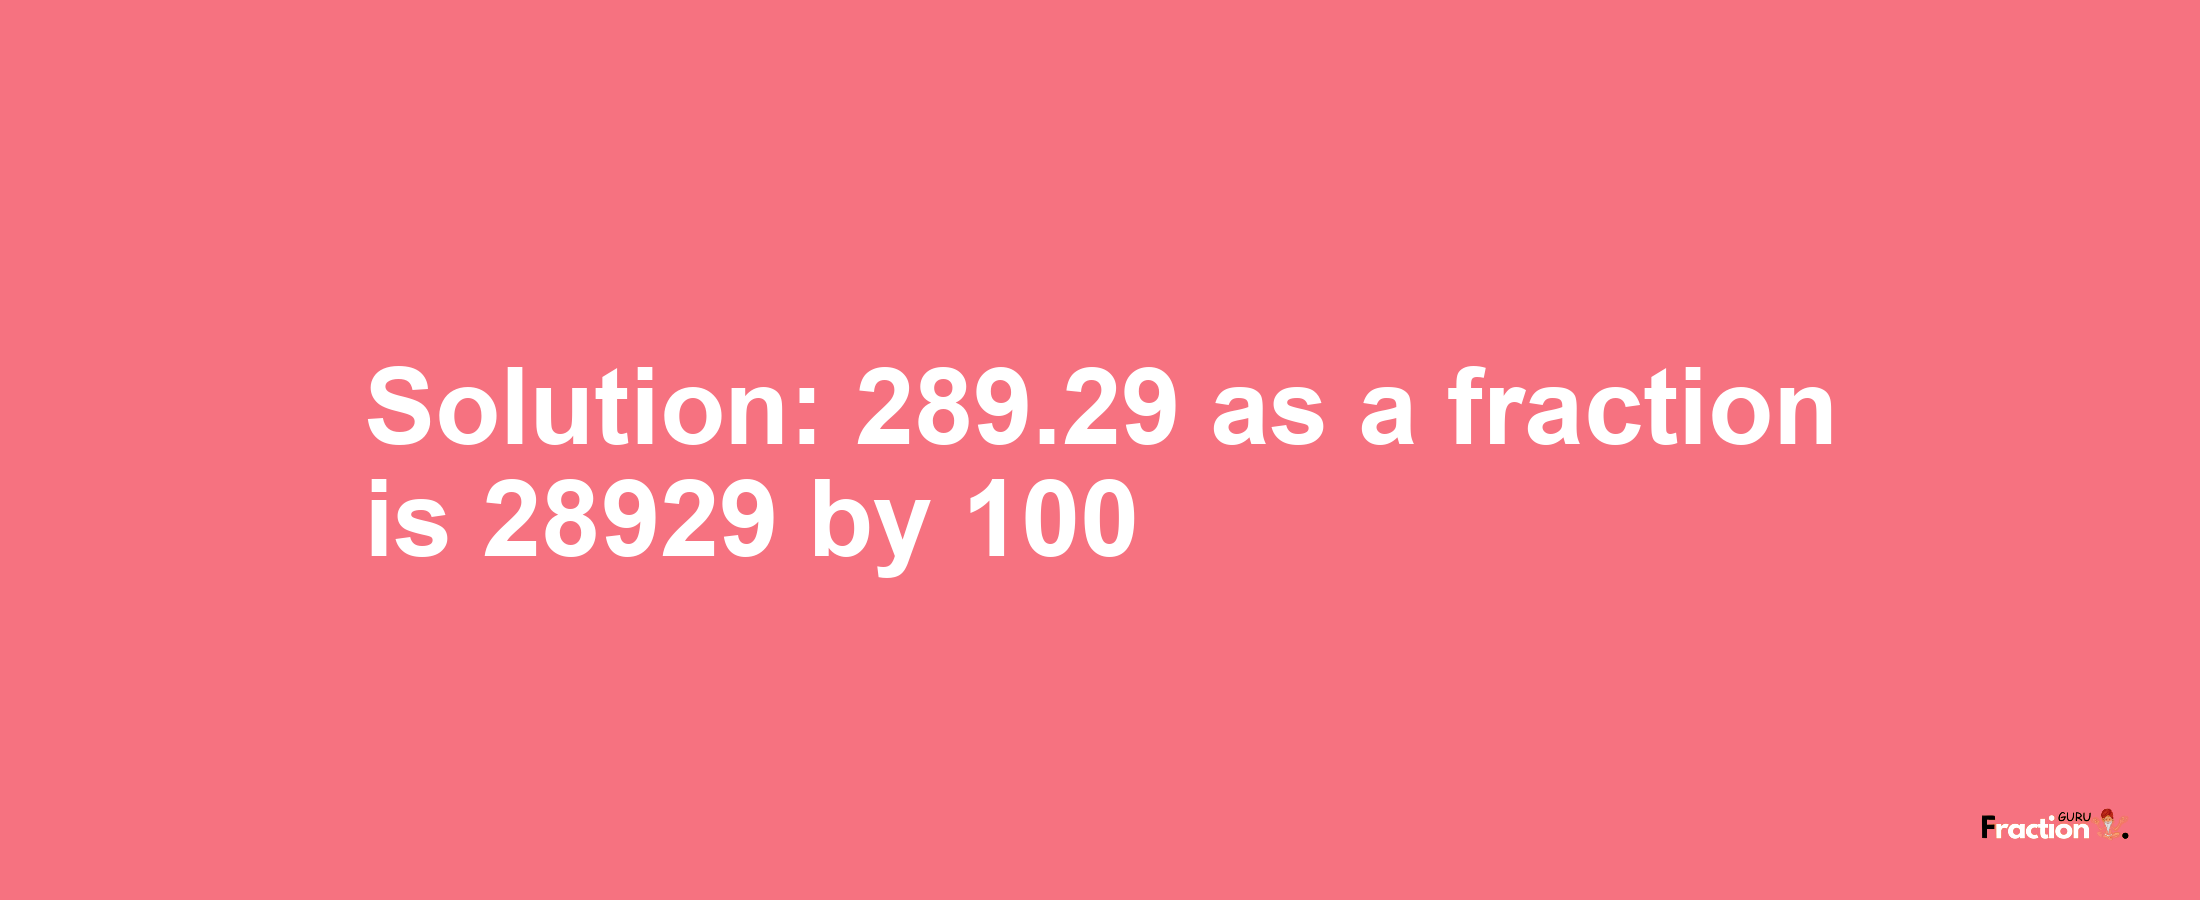 Solution:289.29 as a fraction is 28929/100